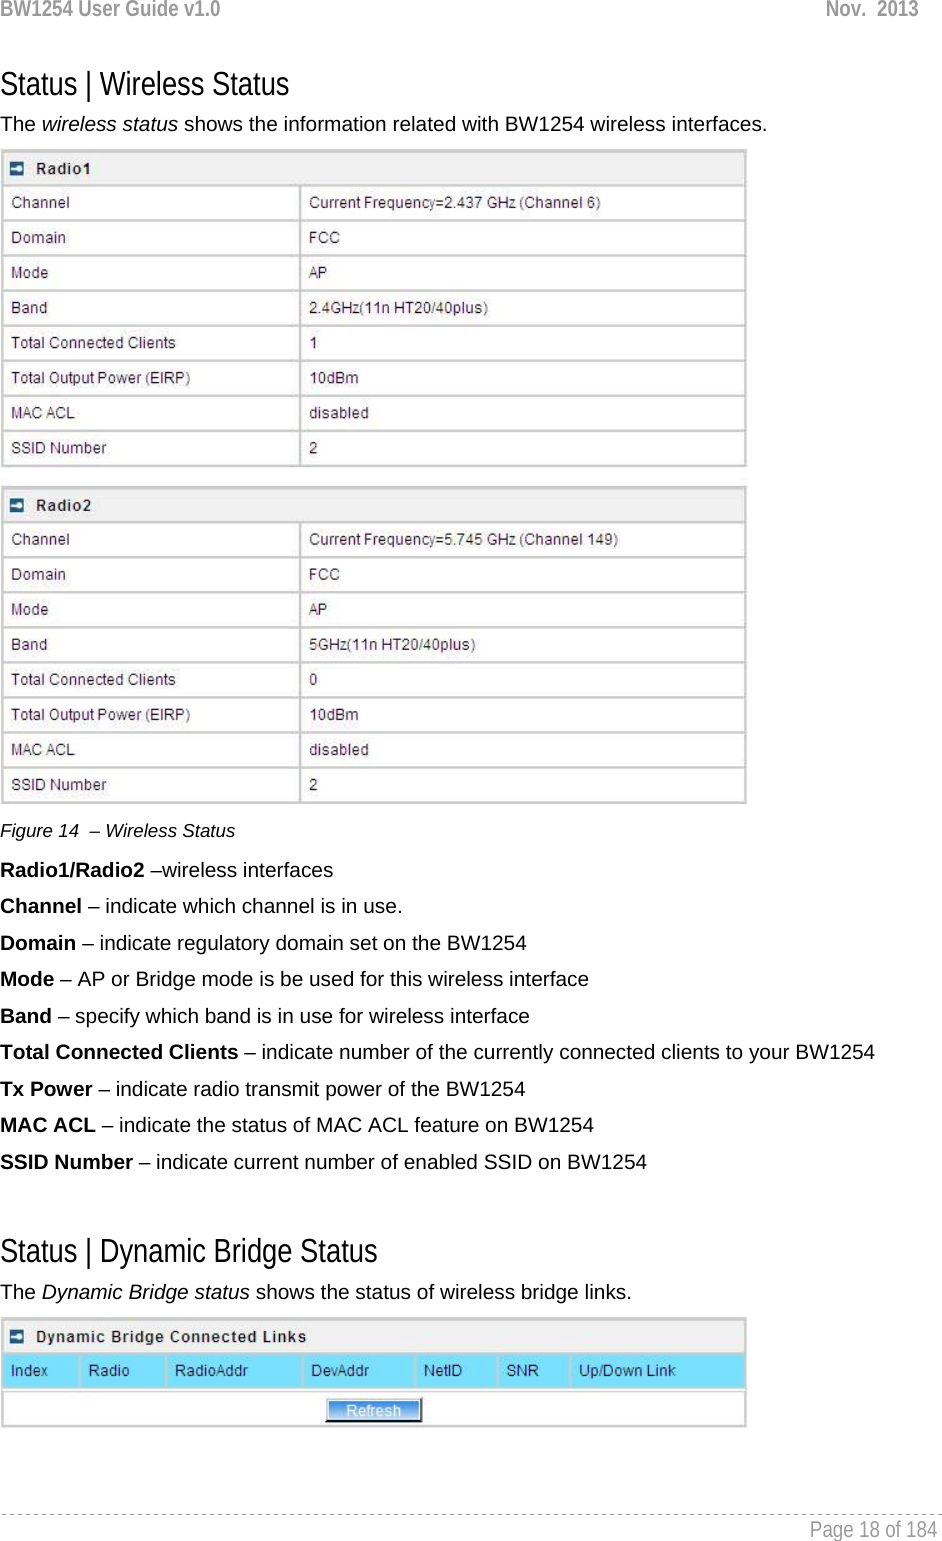 BW1254 User Guide v1.0  Nov.  2013     Page 18 of 184   Status | Wireless Status The wireless status shows the information related with BW1254 wireless interfaces.  Figure 14  – Wireless Status Radio1/Radio2 –wireless interfaces Channel – indicate which channel is in use. Domain – indicate regulatory domain set on the BW1254 Mode – AP or Bridge mode is be used for this wireless interface Band – specify which band is in use for wireless interface Total Connected Clients – indicate number of the currently connected clients to your BW1254 Tx Power – indicate radio transmit power of the BW1254 MAC ACL – indicate the status of MAC ACL feature on BW1254 SSID Number – indicate current number of enabled SSID on BW1254  Status | Dynamic Bridge Status The Dynamic Bridge status shows the status of wireless bridge links.  